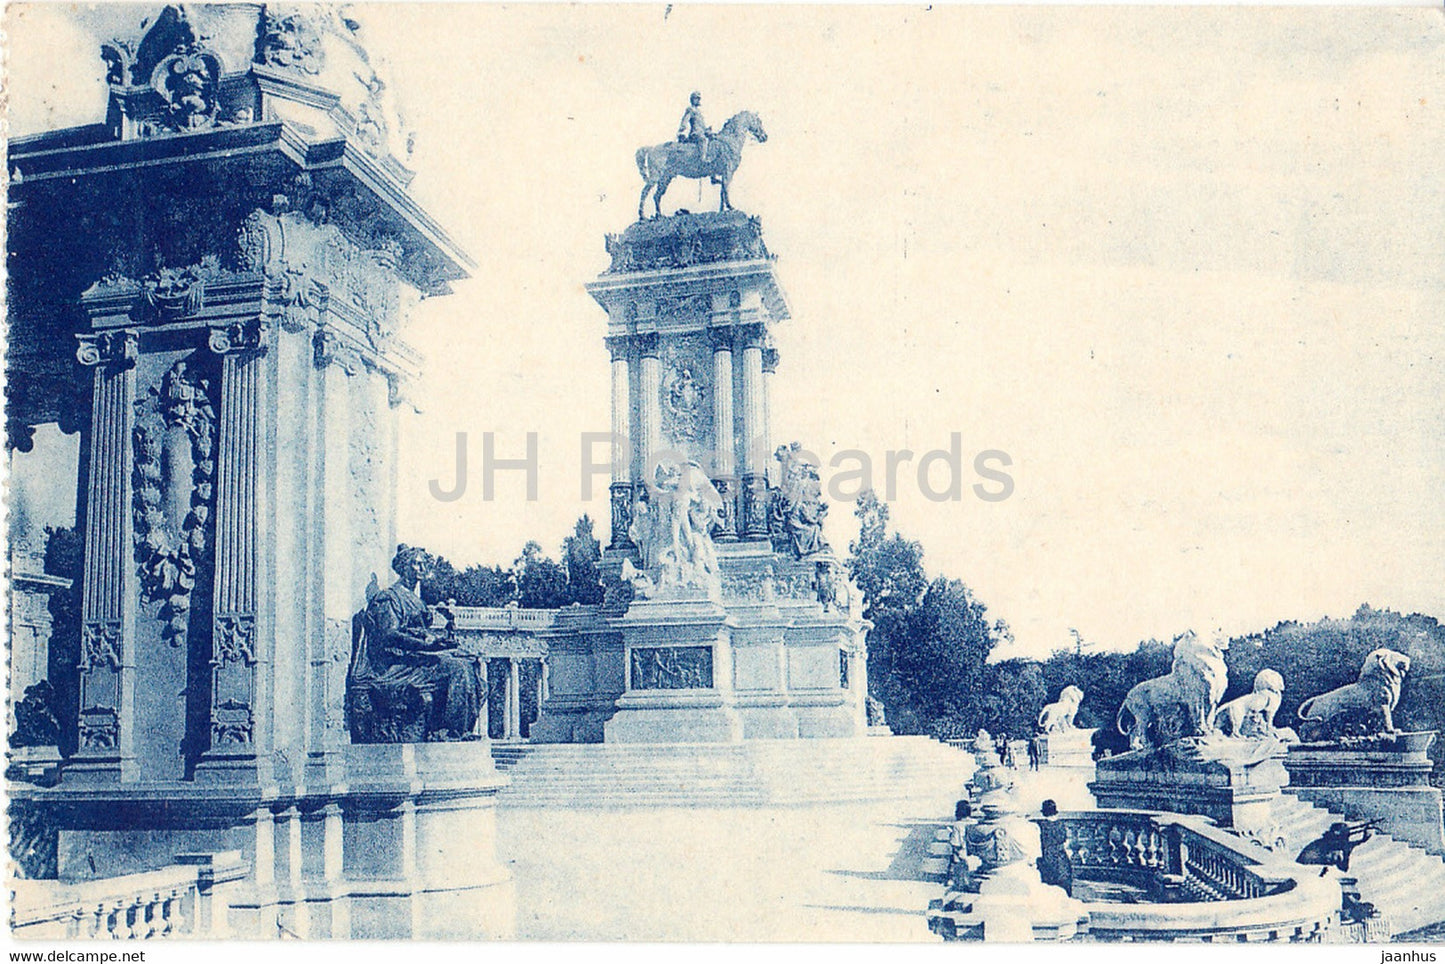 Madrid - Parque del Retiro - Monumento a Alfonso XII - monument - 176 - old postcard - Spain - used - JH Postcards